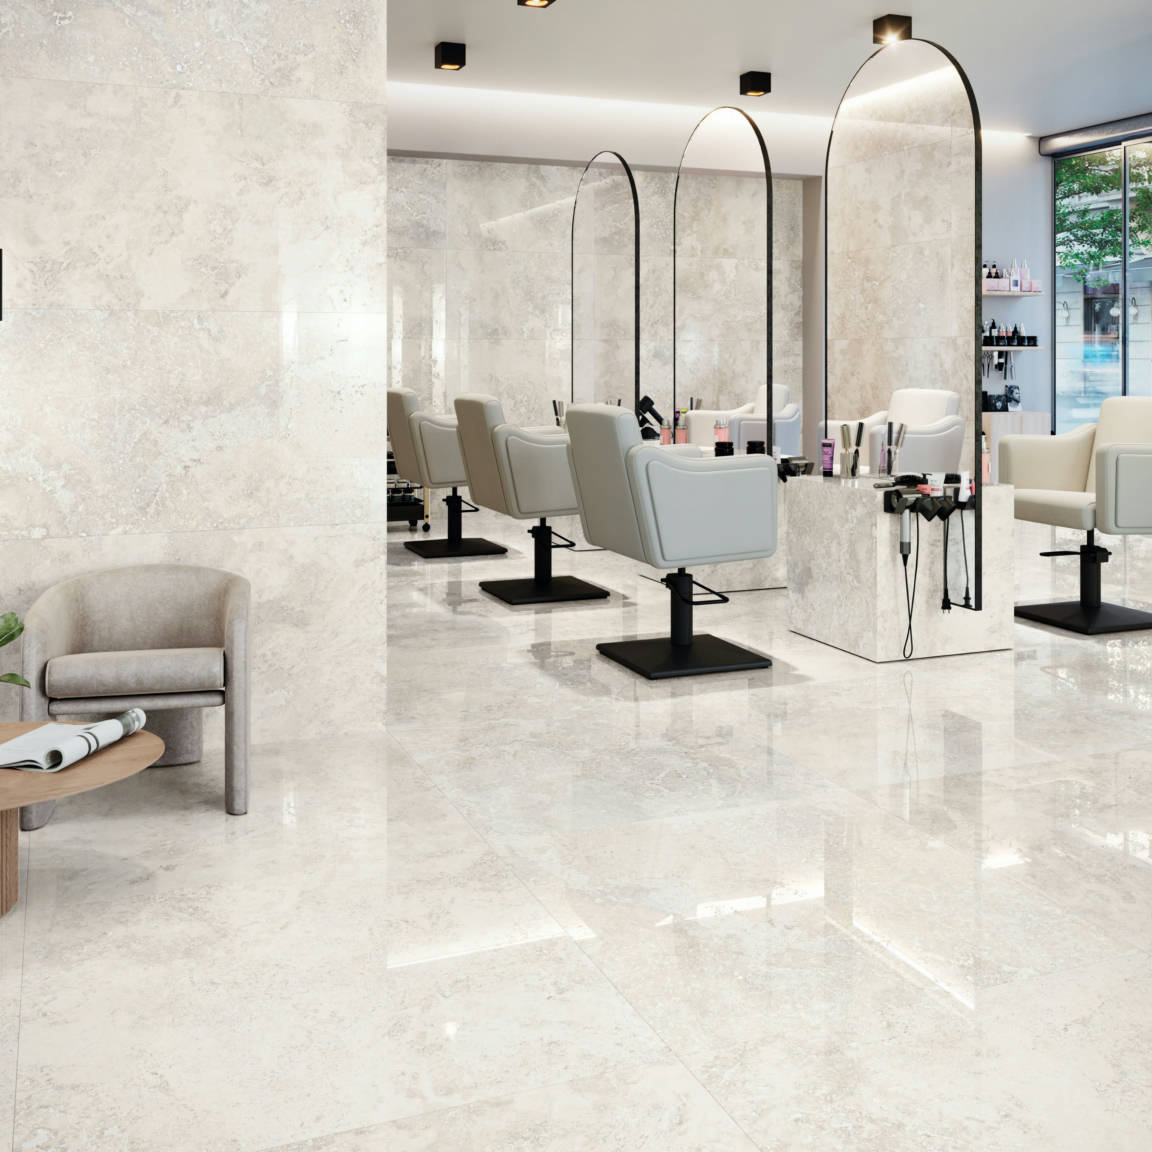 Rapolano_5_G | Stones And More | Finest selection of Mosaics, Glass, Tile and Stone